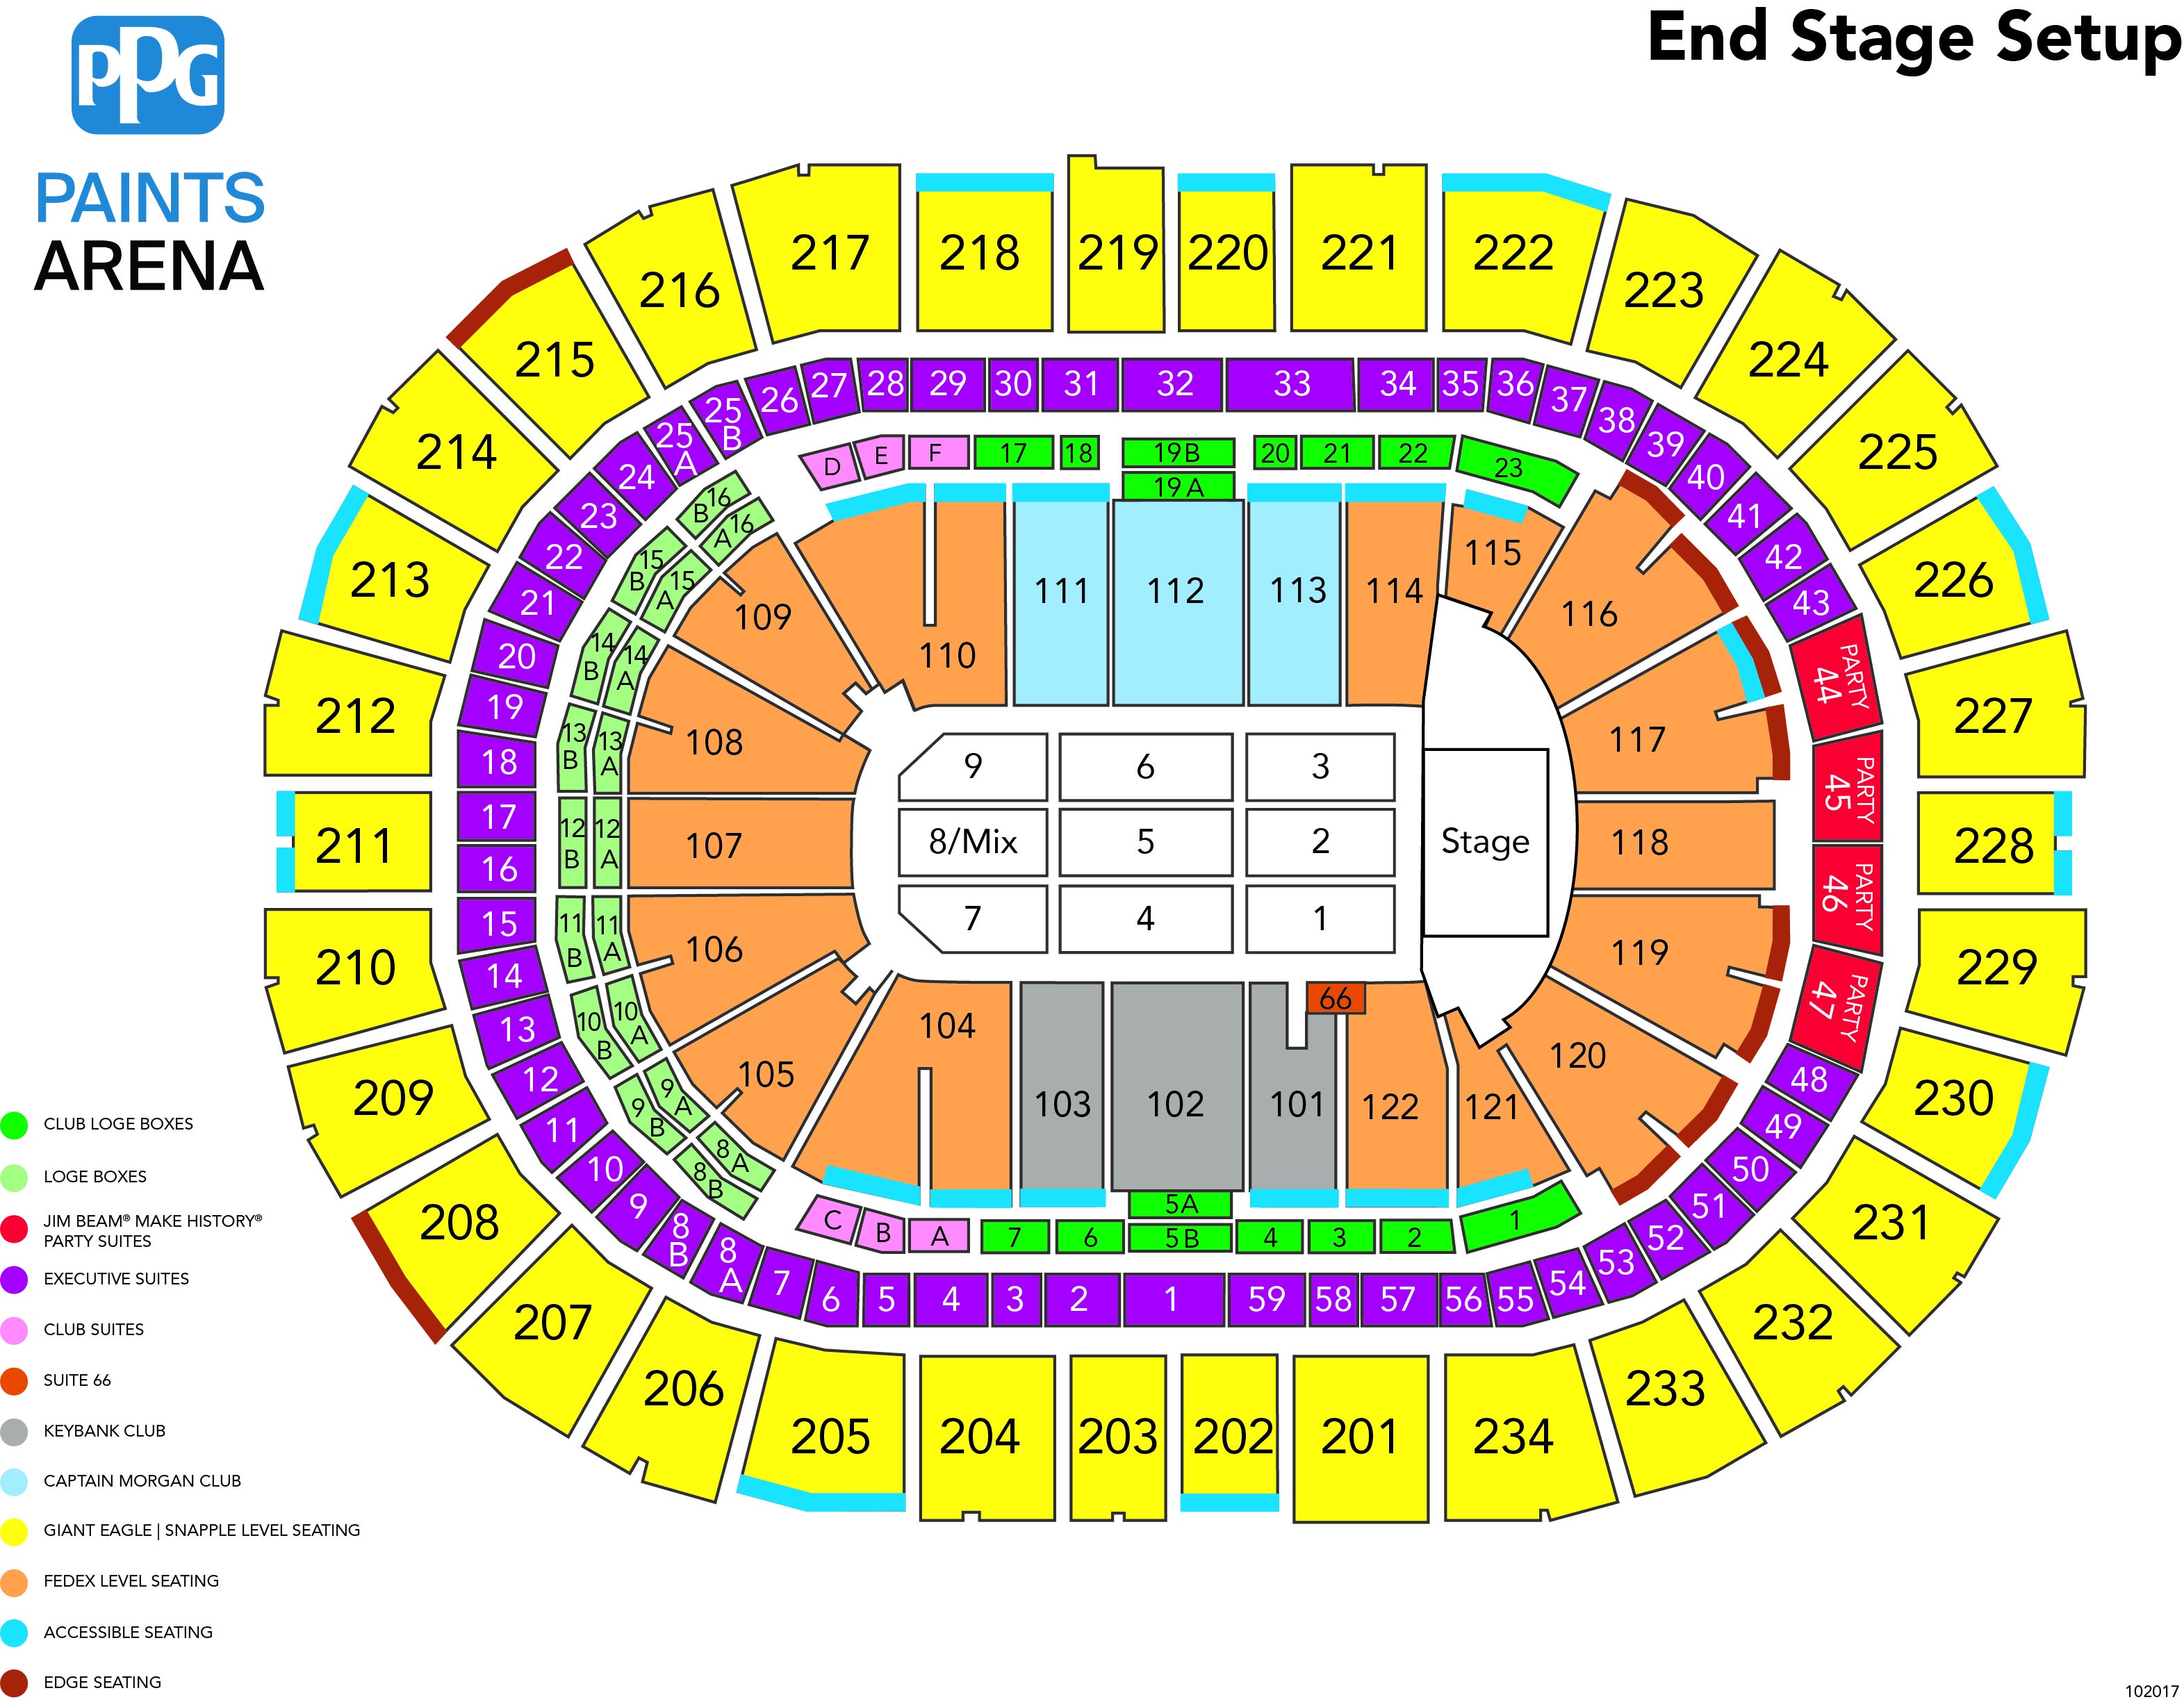 Seating Charts  PPG Paints Arena